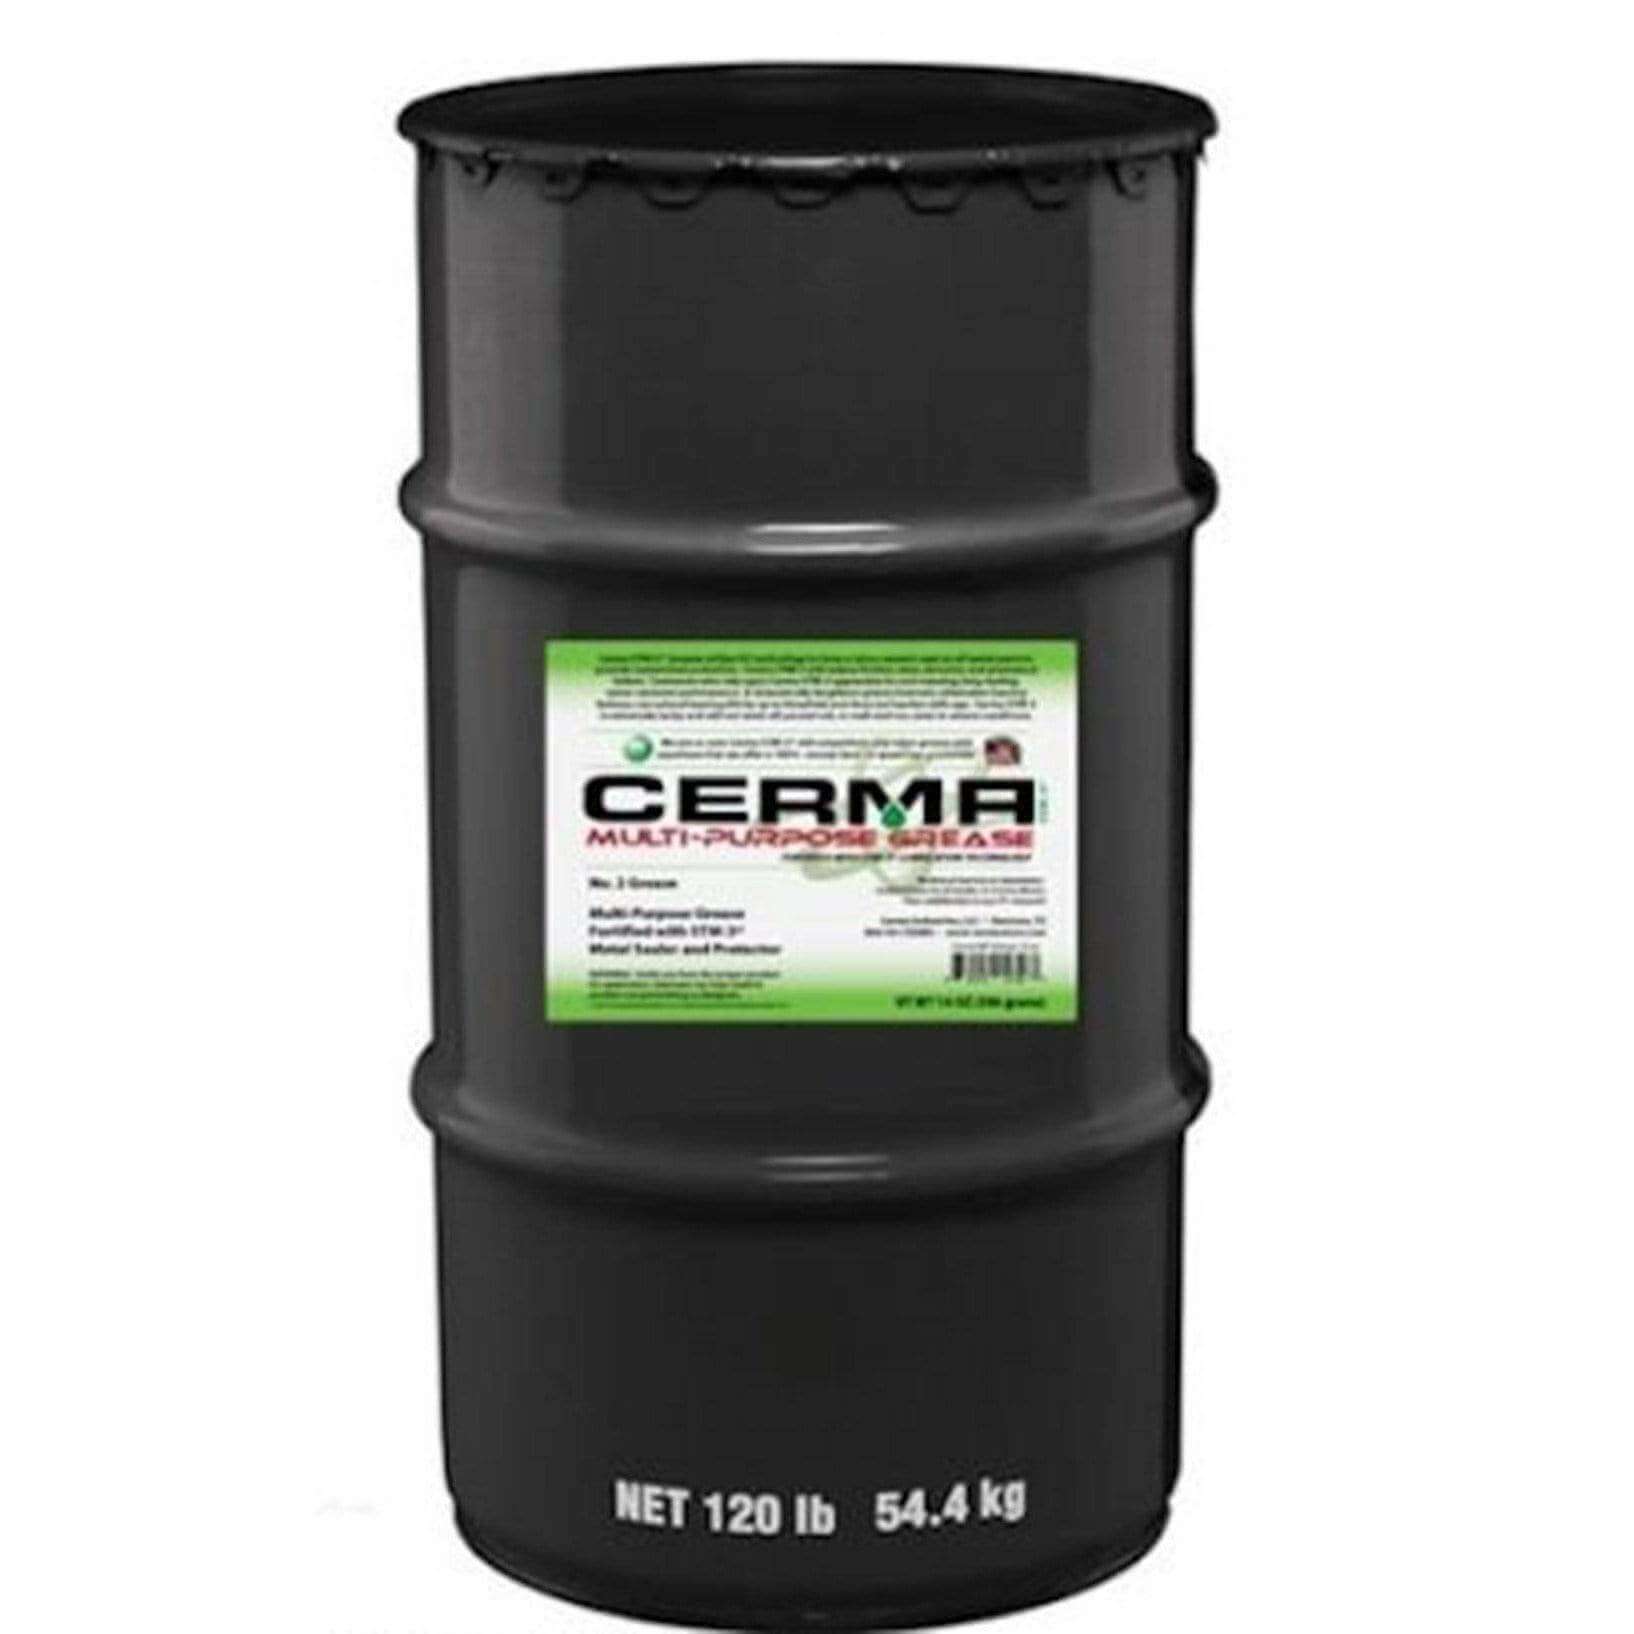 Cerma Ceramic Multi Purpose Grease at $1016.2 only from cermatreatment.com